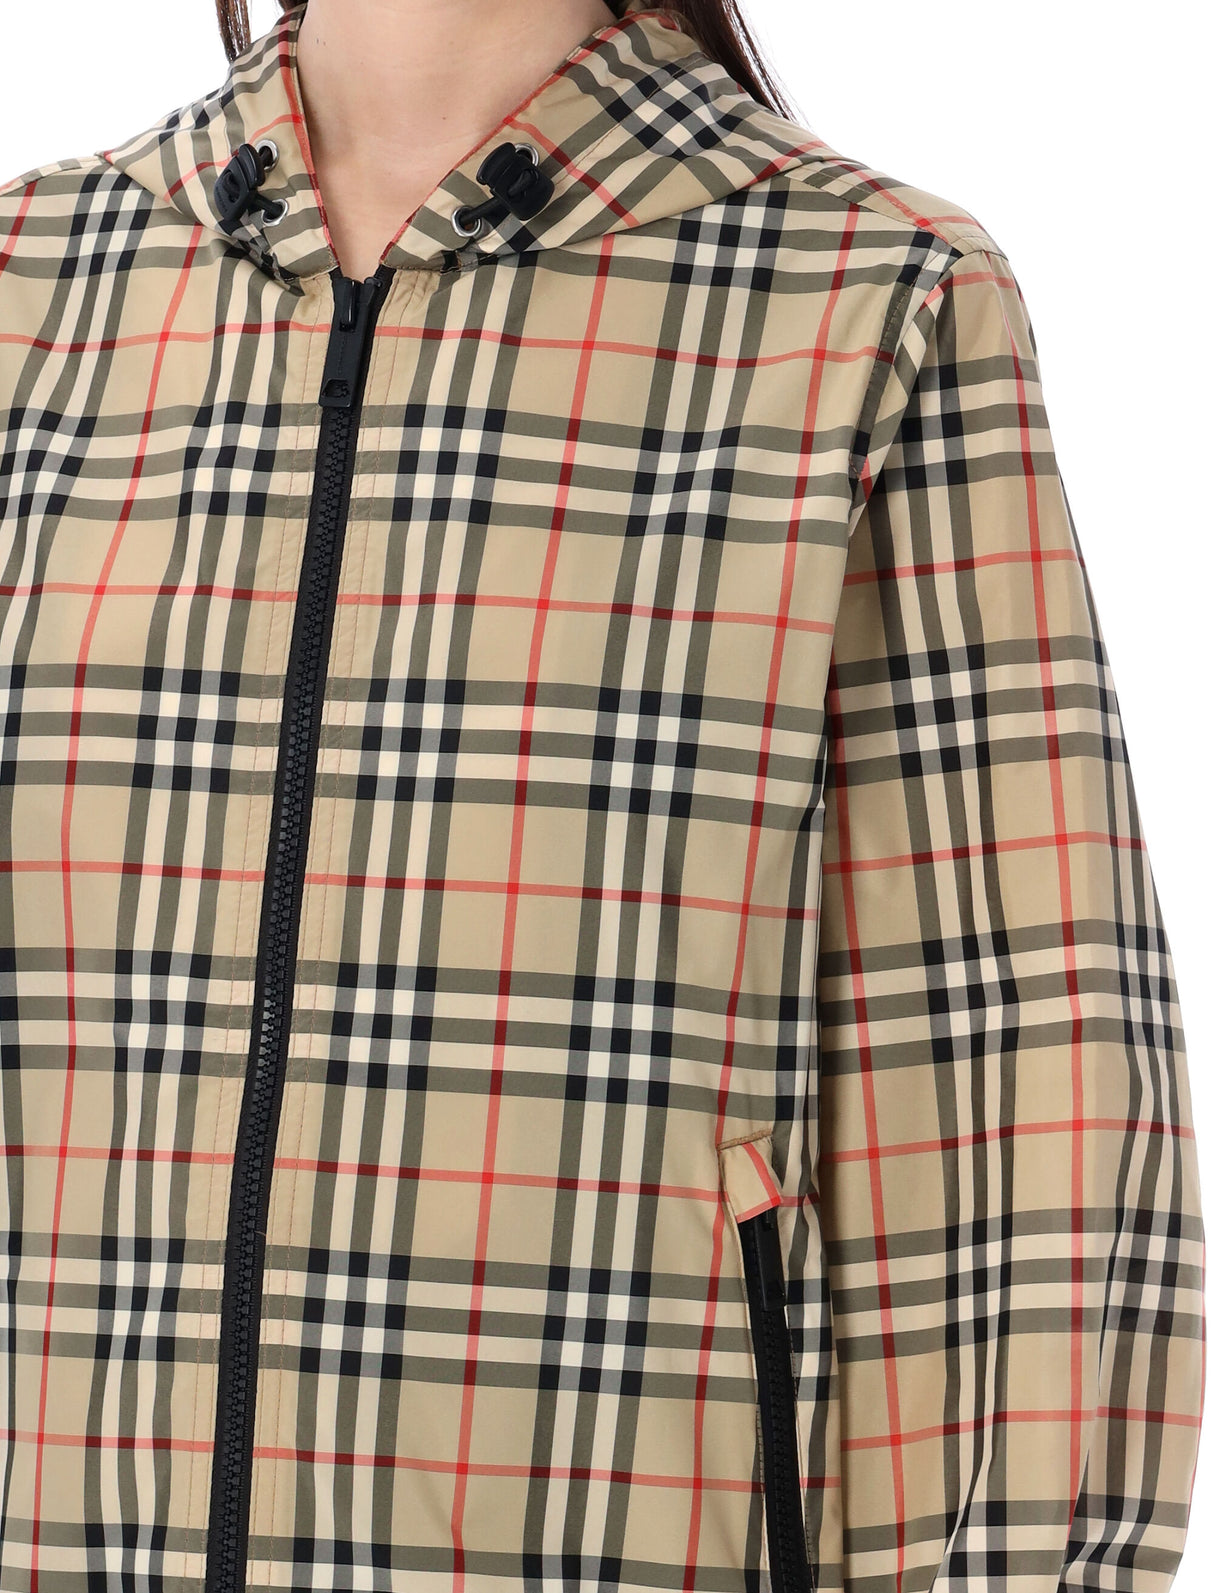 Everton Vintage Check Jacket - Classic Print Zip-Up Outerwear for Women